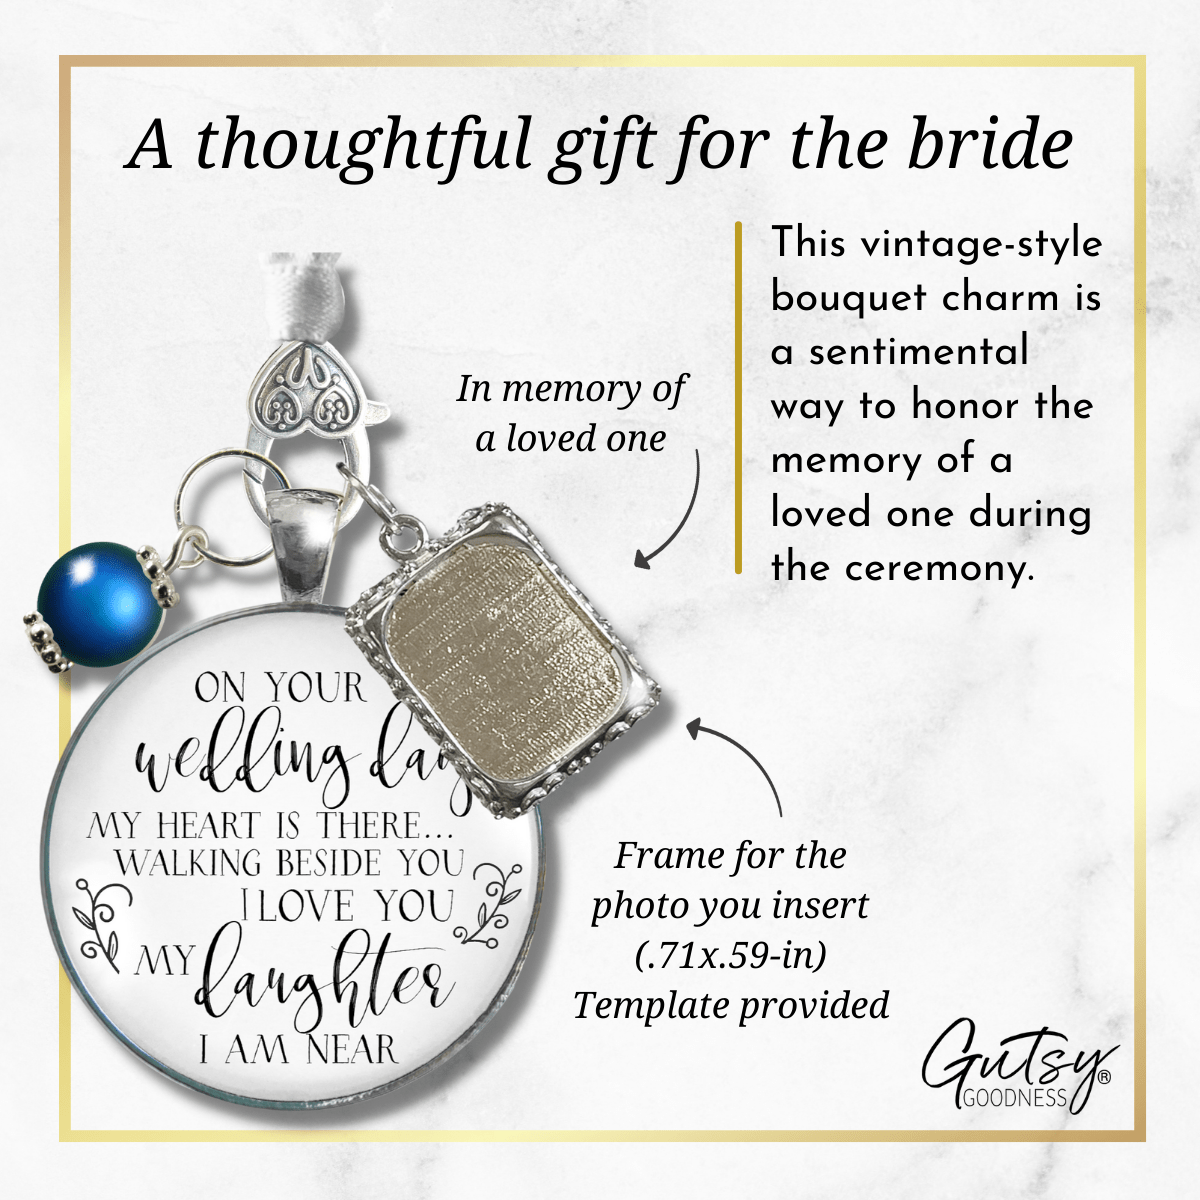 Bouquet Charm On Your Wedding Day Mom Dad White Silvertone Blue Memorial Photo Frame - Gutsy Goodness Handmade Jewelry Gifts